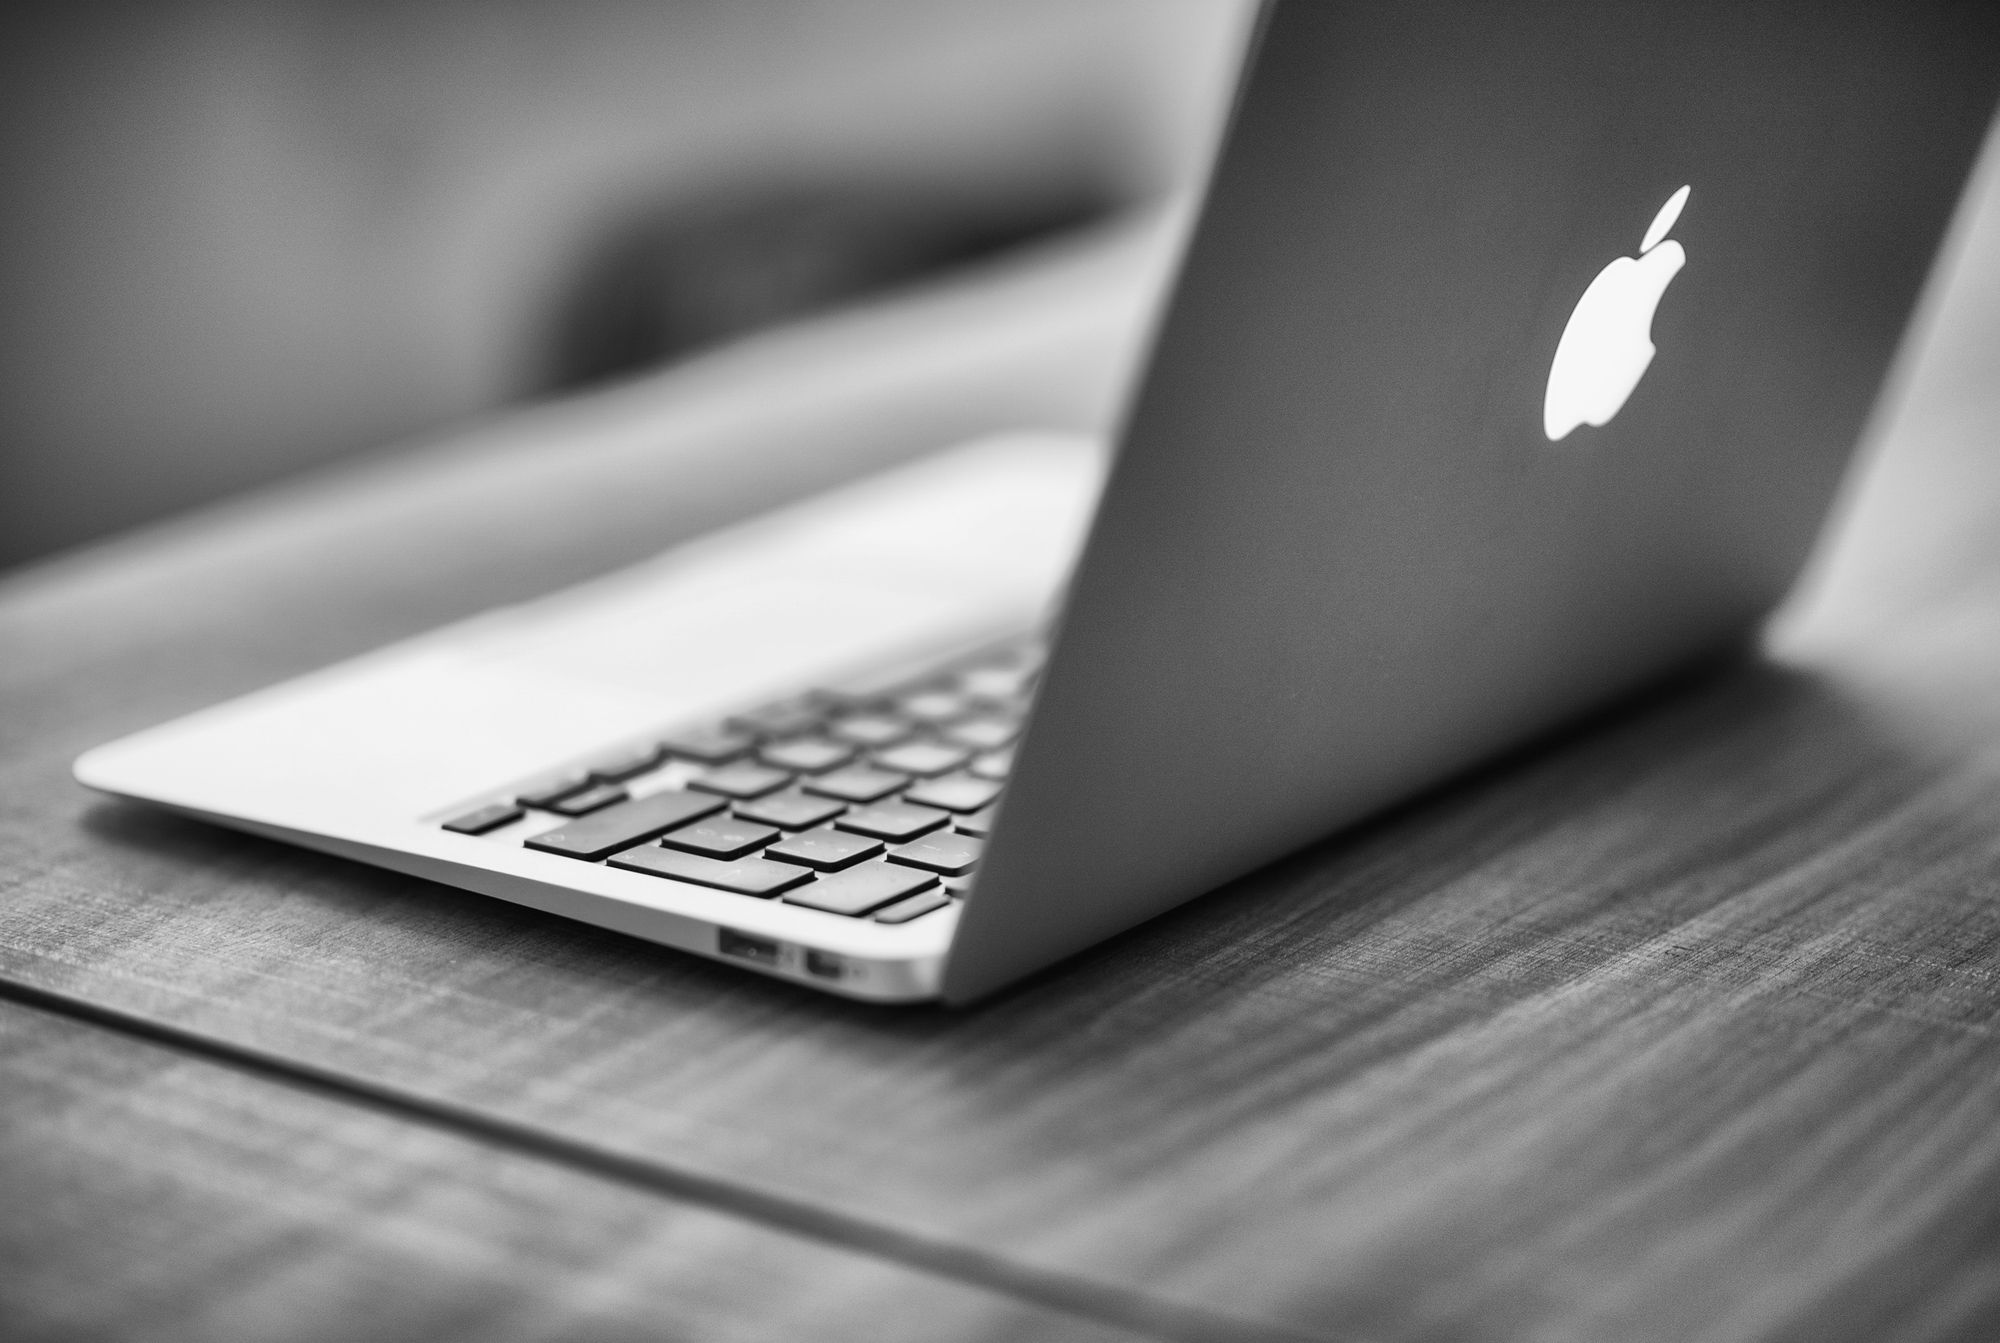 Second Apple Class Action Alleges MacBook Pro Keyboard Defect Top